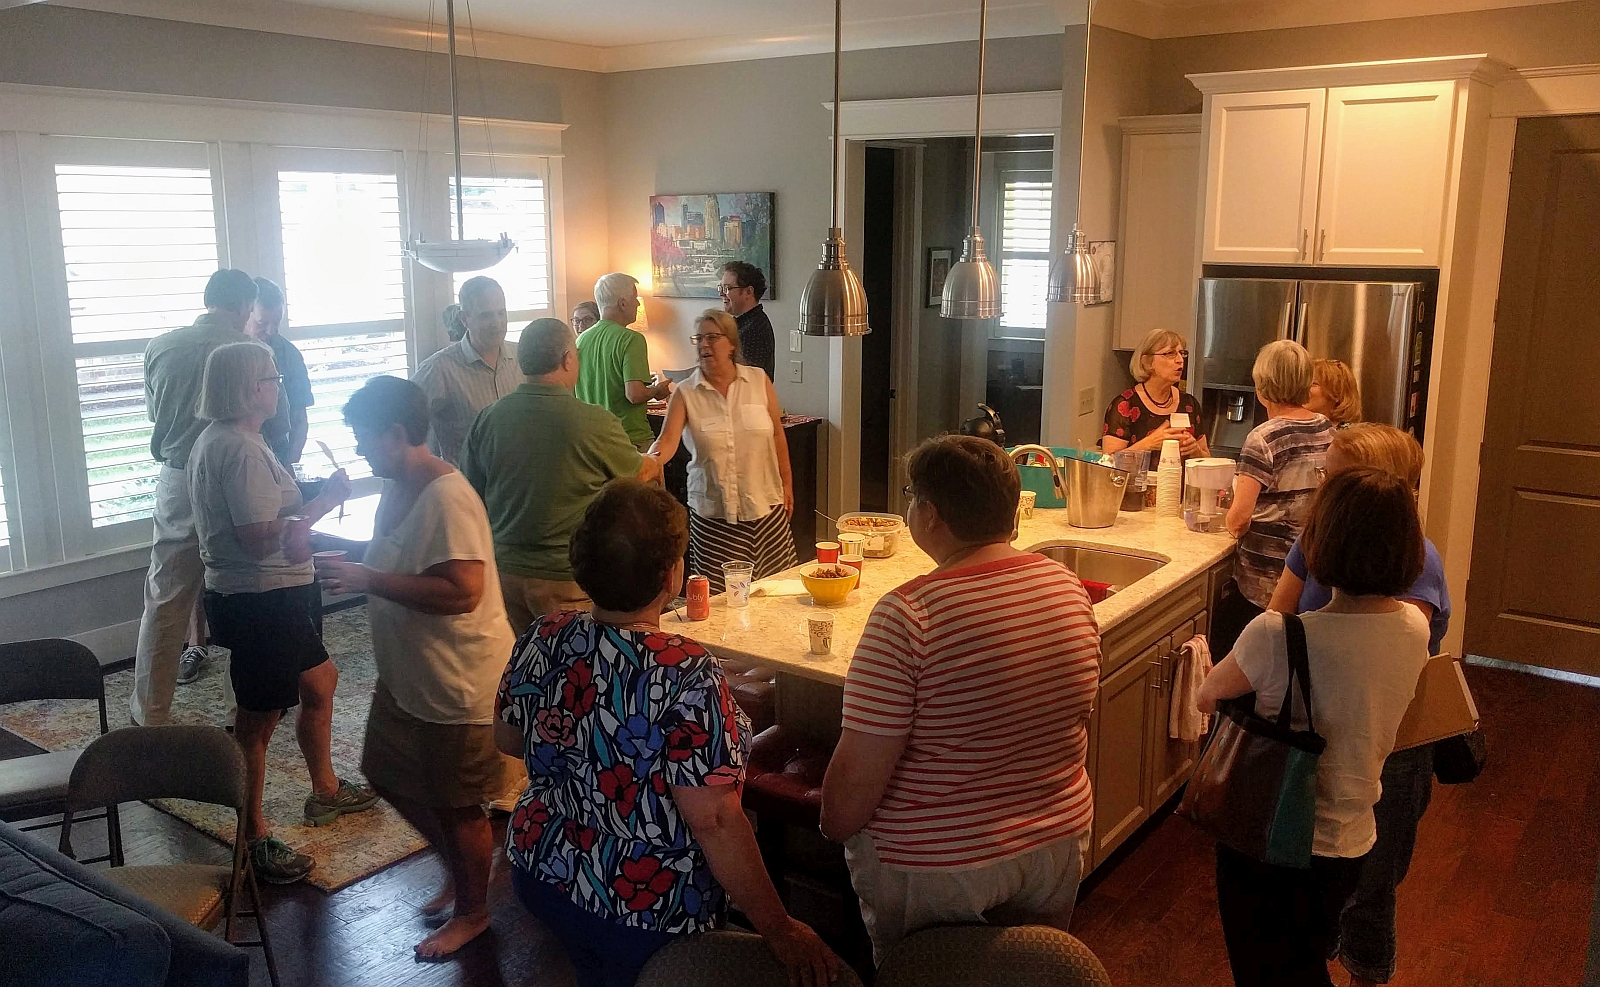 Various groups of folks standing in kitchen area holding drinks and food, talking.